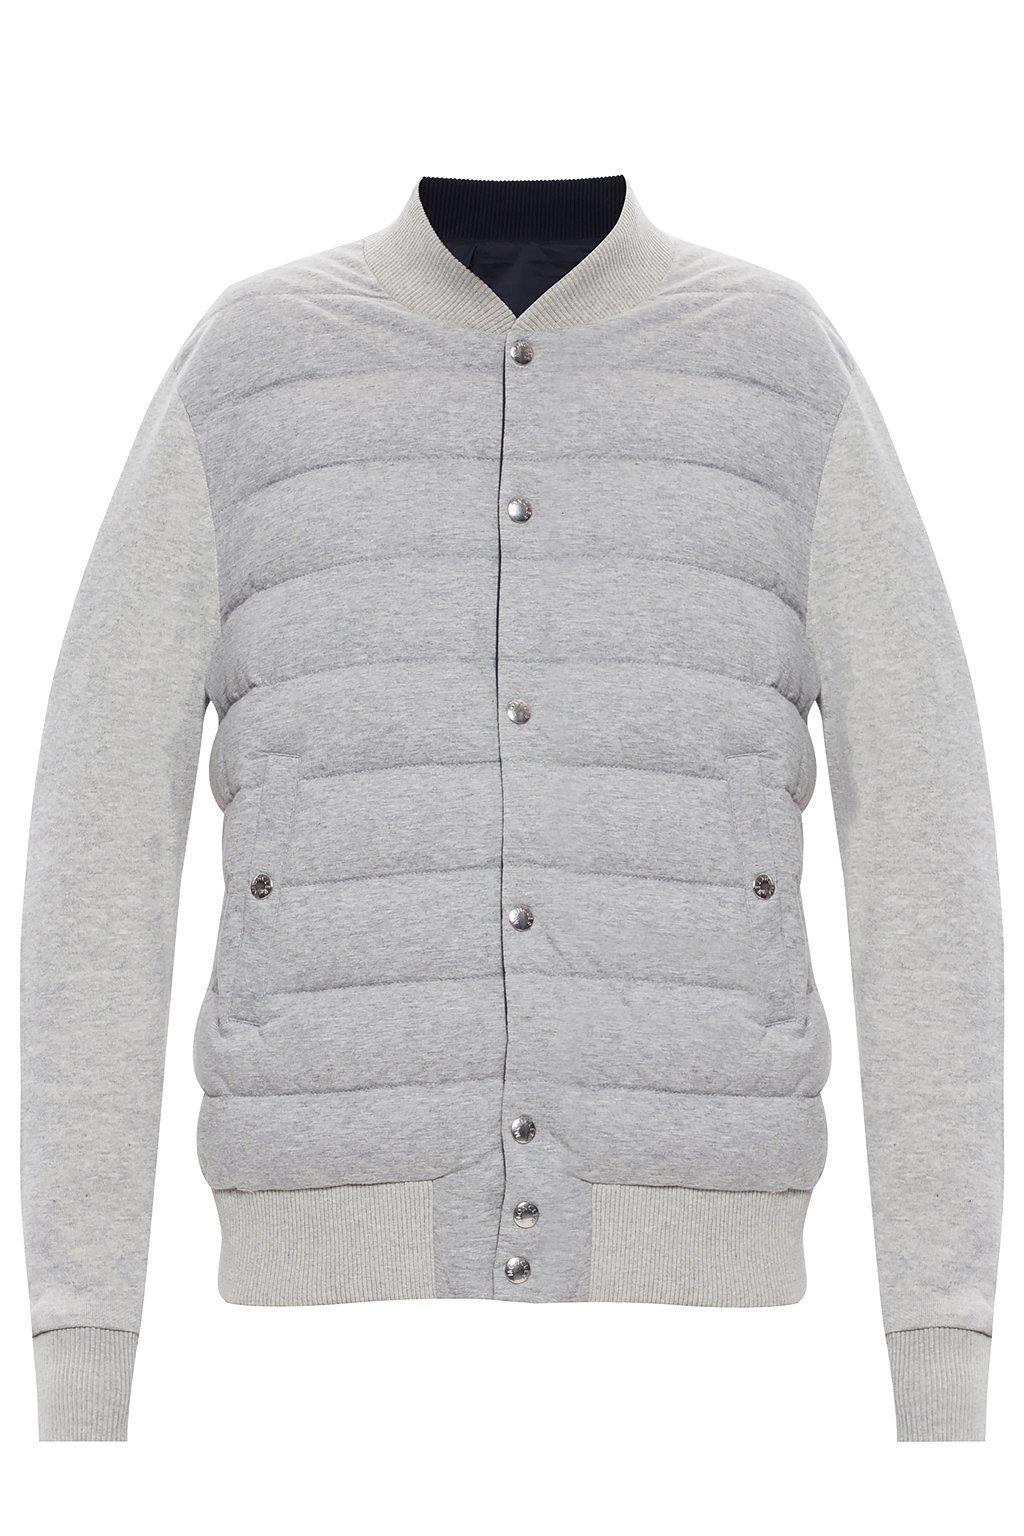 Moncler Synthetic Reversible Bomber Jacket in Grey (Gray) for Men | Lyst